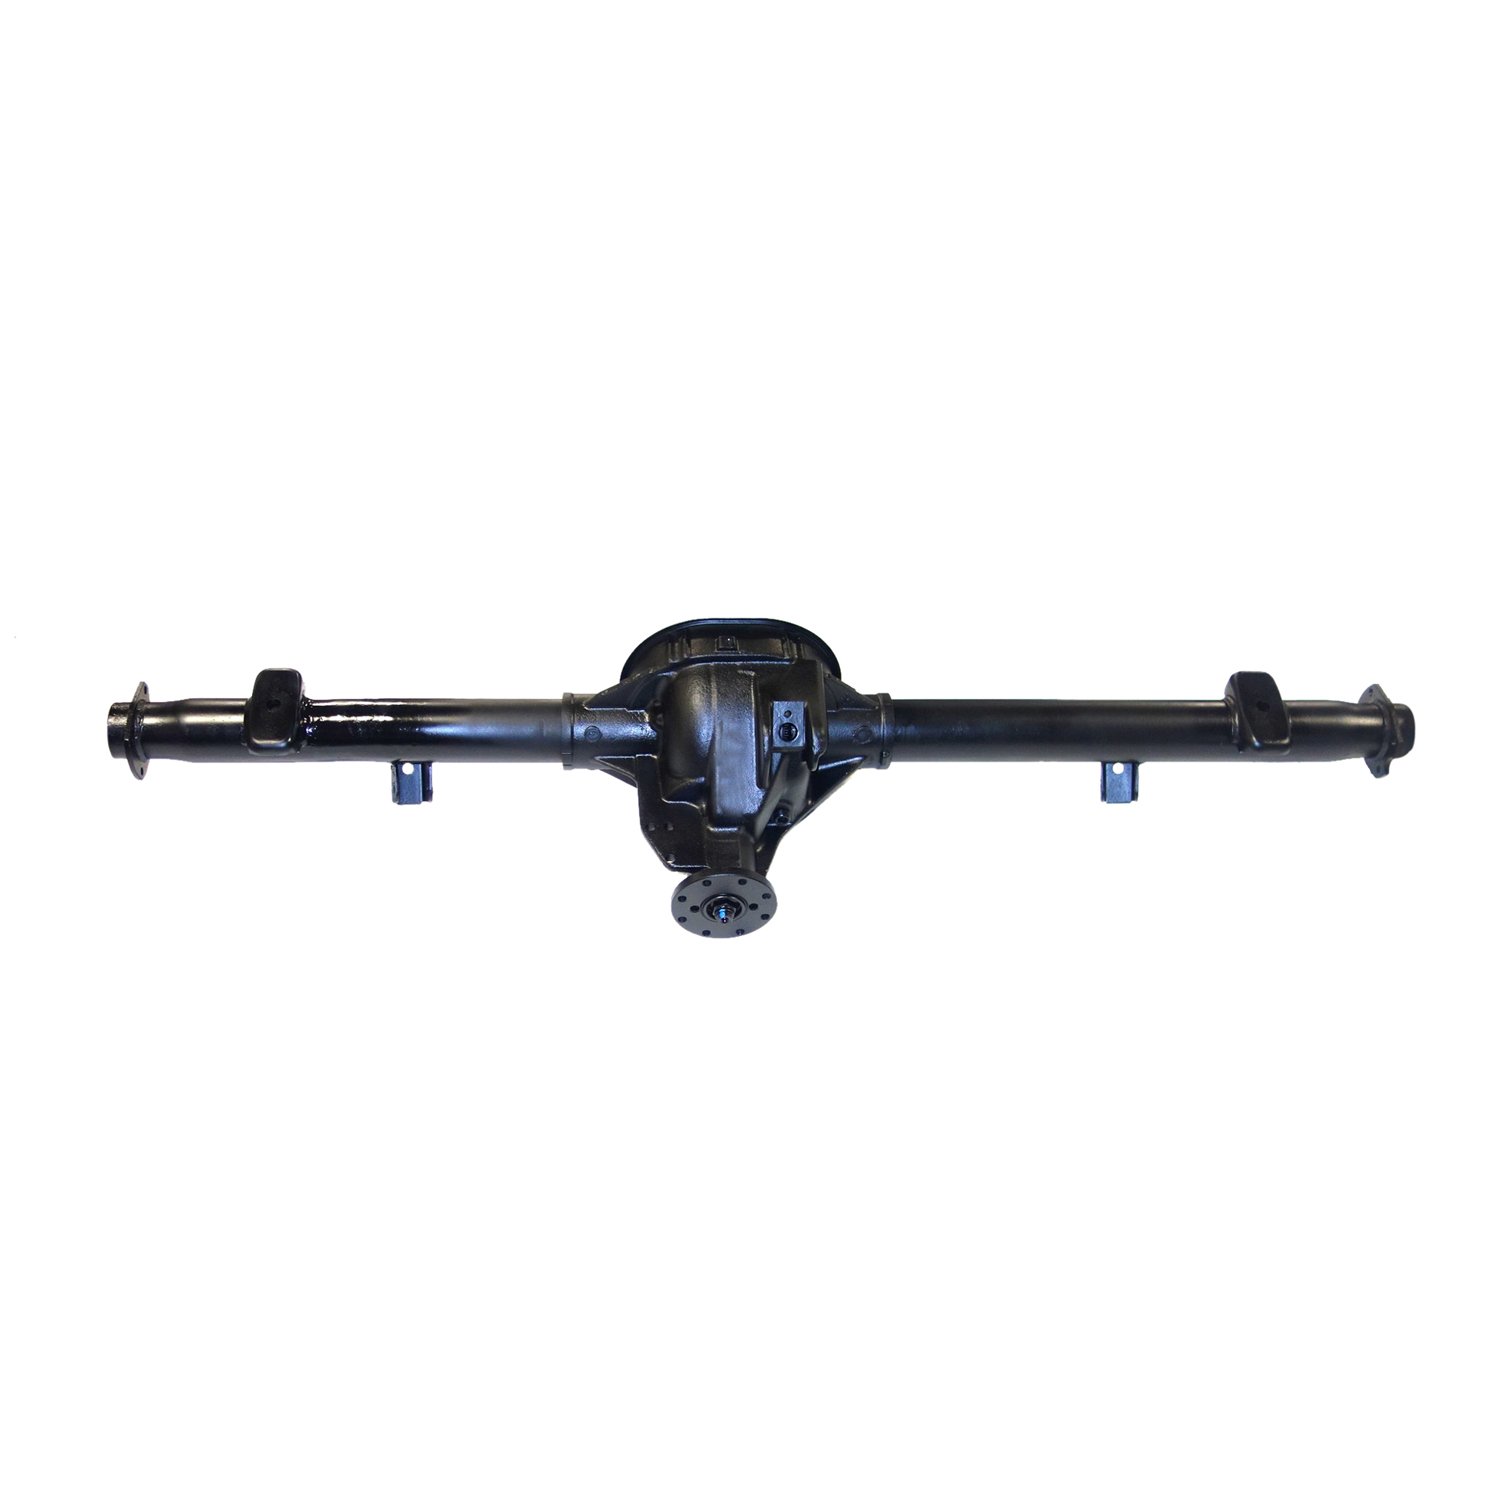 Remanufactured Axle Assy for 8.8" 2000 F150 3.08 , Rear Disc, Posi LSD *Check Tag*